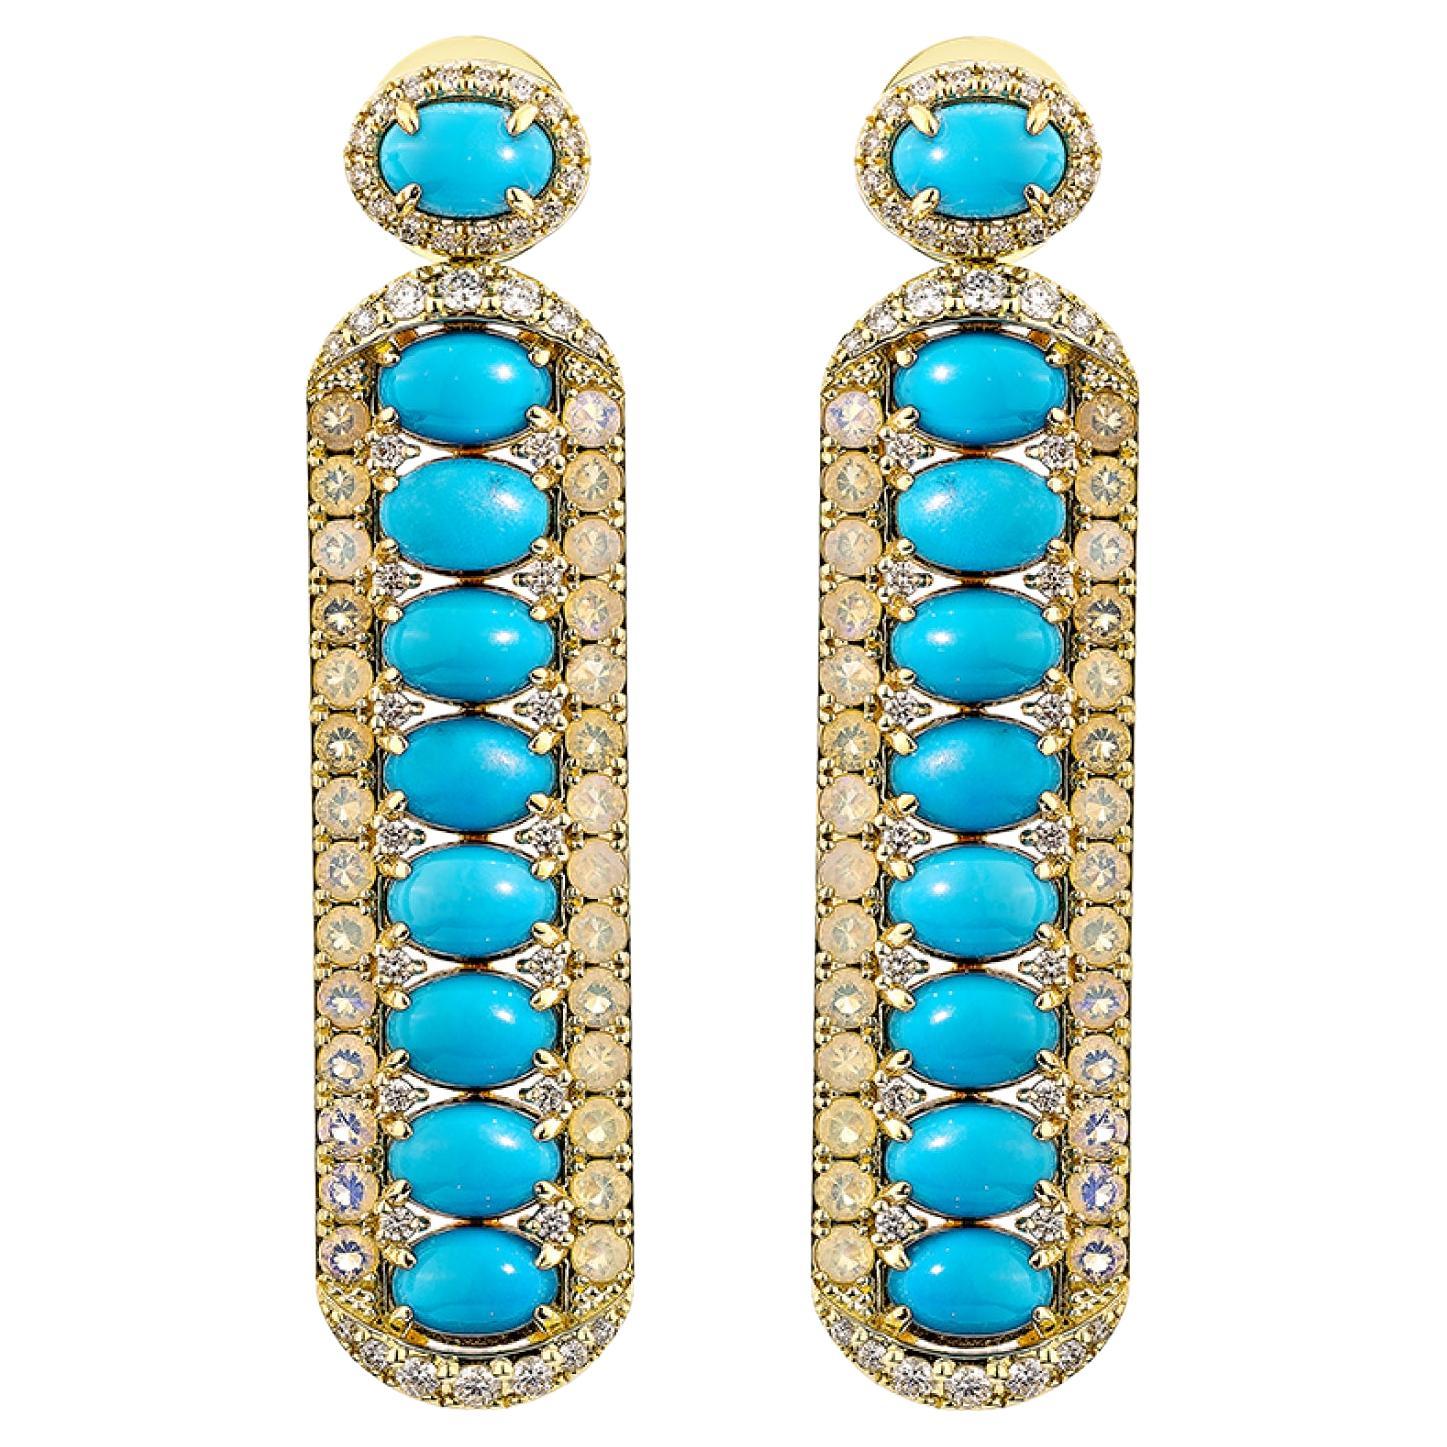 8.427 Carat Turquoise Drop Earring in 18KYG with Opal & White Diamond.